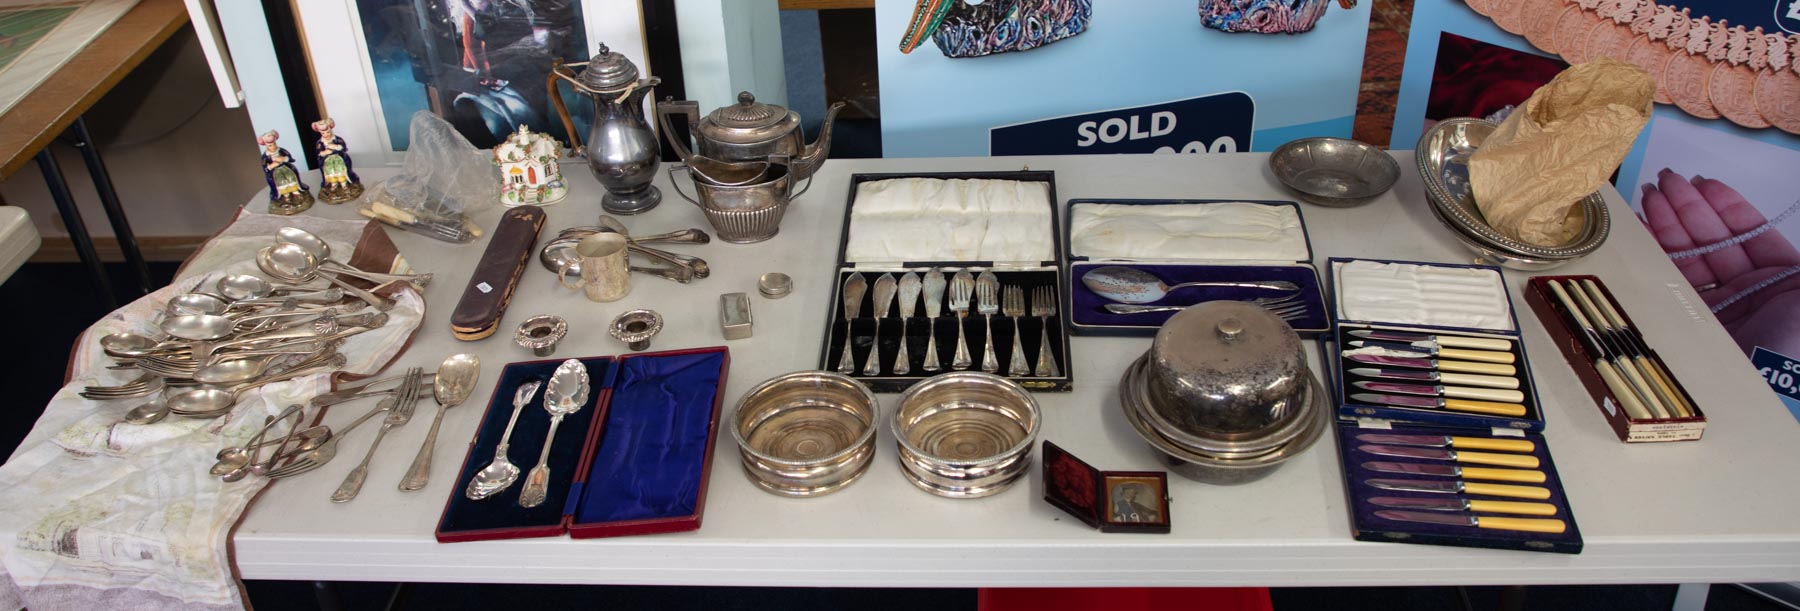 A large collection of silver plated wares including teapot, coffee pot, flatware etc.